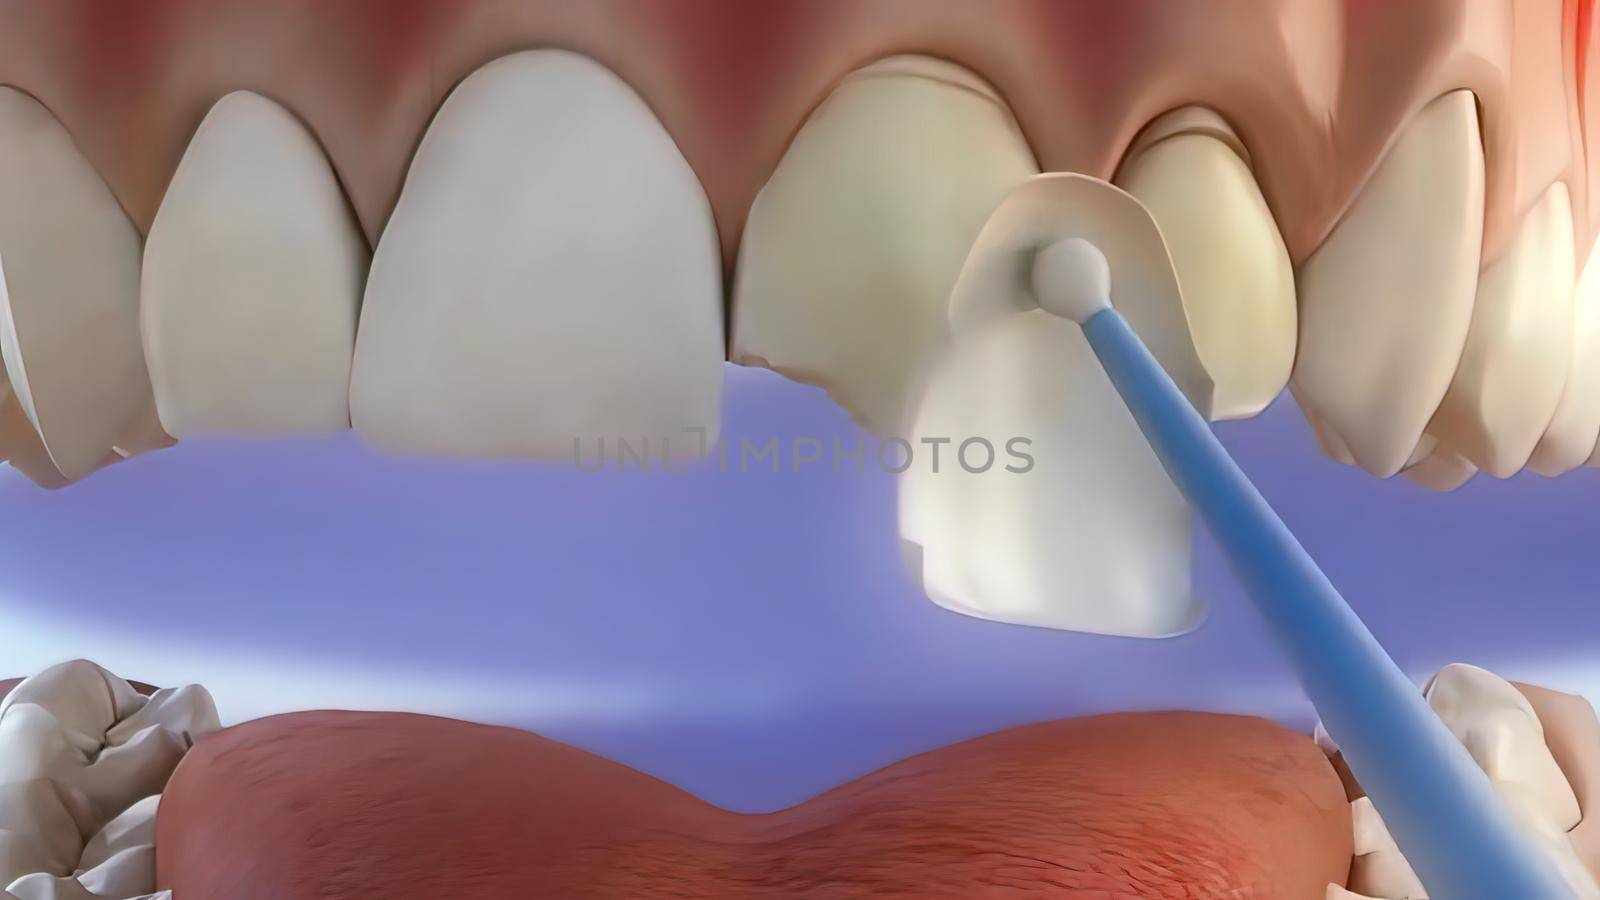 The process of chipping damaged teeth by creativepic